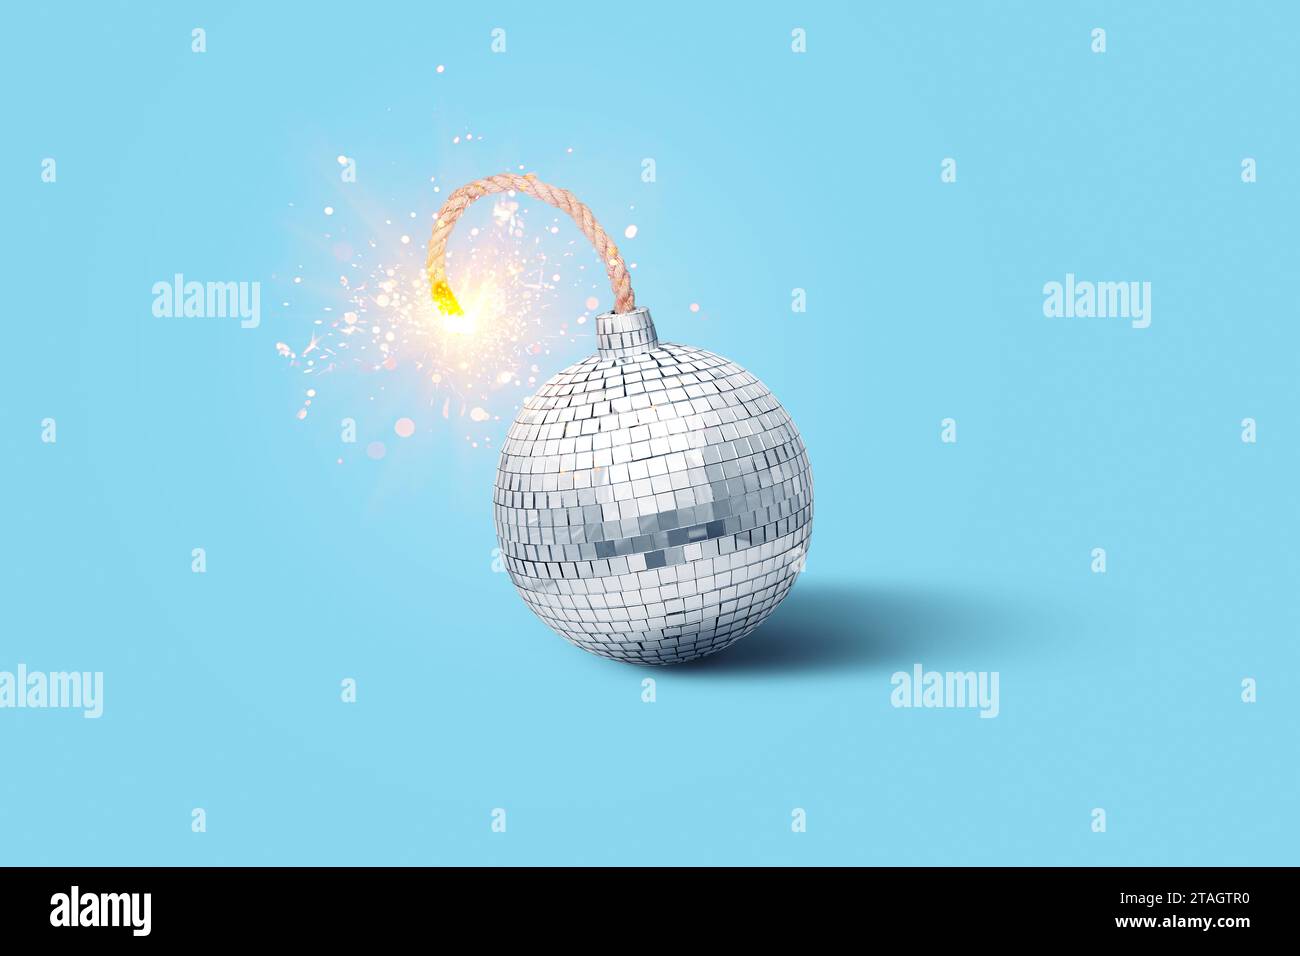 Disco mirror ball bomb with wick and sparks on blue background, creative idea. New Year and Christmas. Explosive music, concept Stock Photo